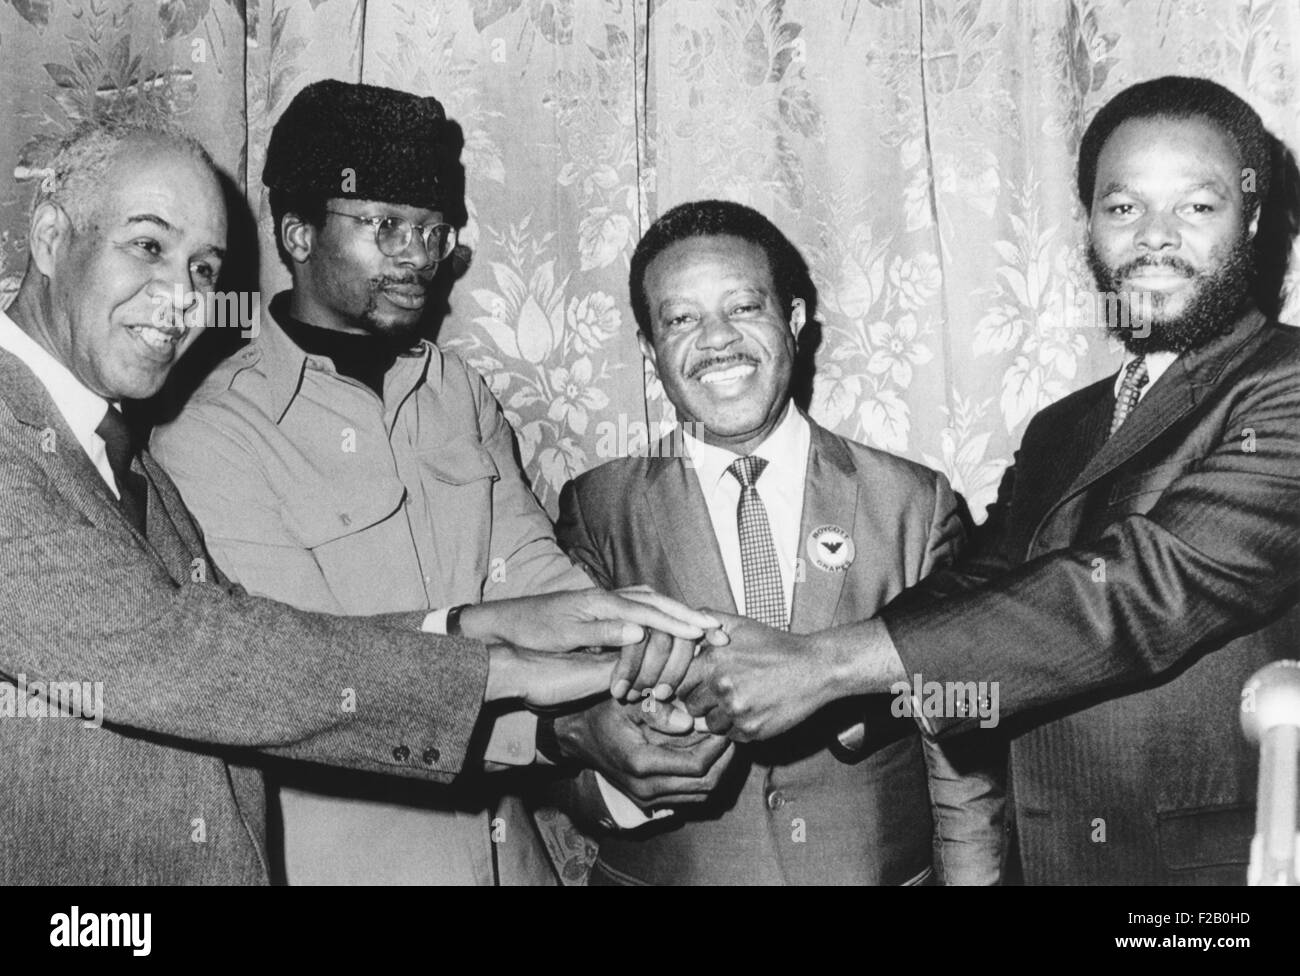 African American leaders joined hands prior to a panel discussion at Boston College. Dec. 8, 1969. L-R: Roy Wilkins, Exe. Dir. Of the NAACP; Mesia Hewitt, Chrm. Black Panthers; Dr. Ralph Abernathy, Pres. Southern Christian Leadership Conference (SCLC); and Roy Ennis, Dir. Congress of Racial Equality. (CSU 2015 9 1108) Stock Photo